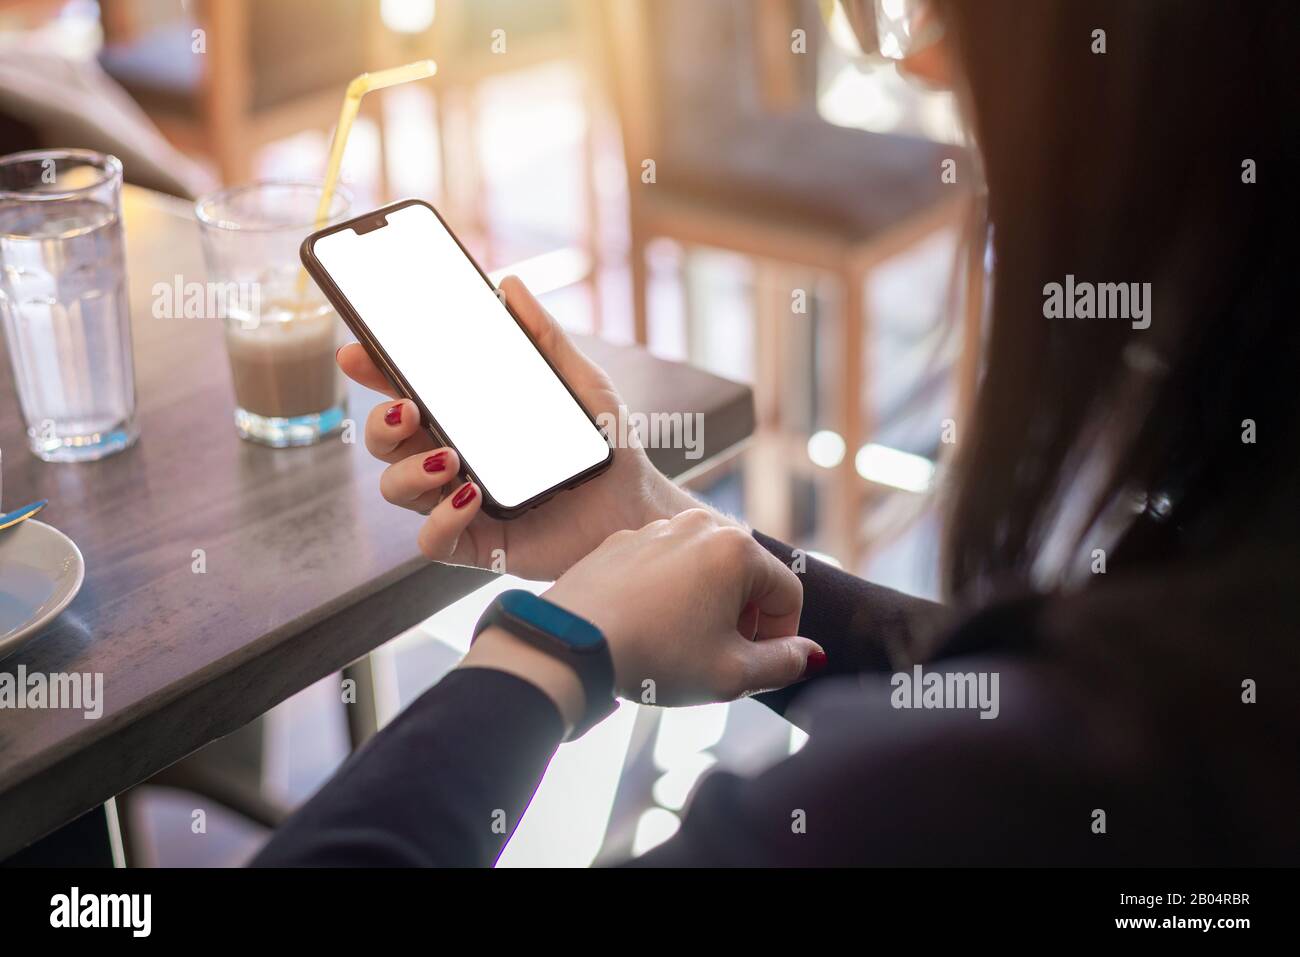 Woman watching smart phone and smart bracelet. hone with blank screen for mockup. Coffee sho in background Stock Photo